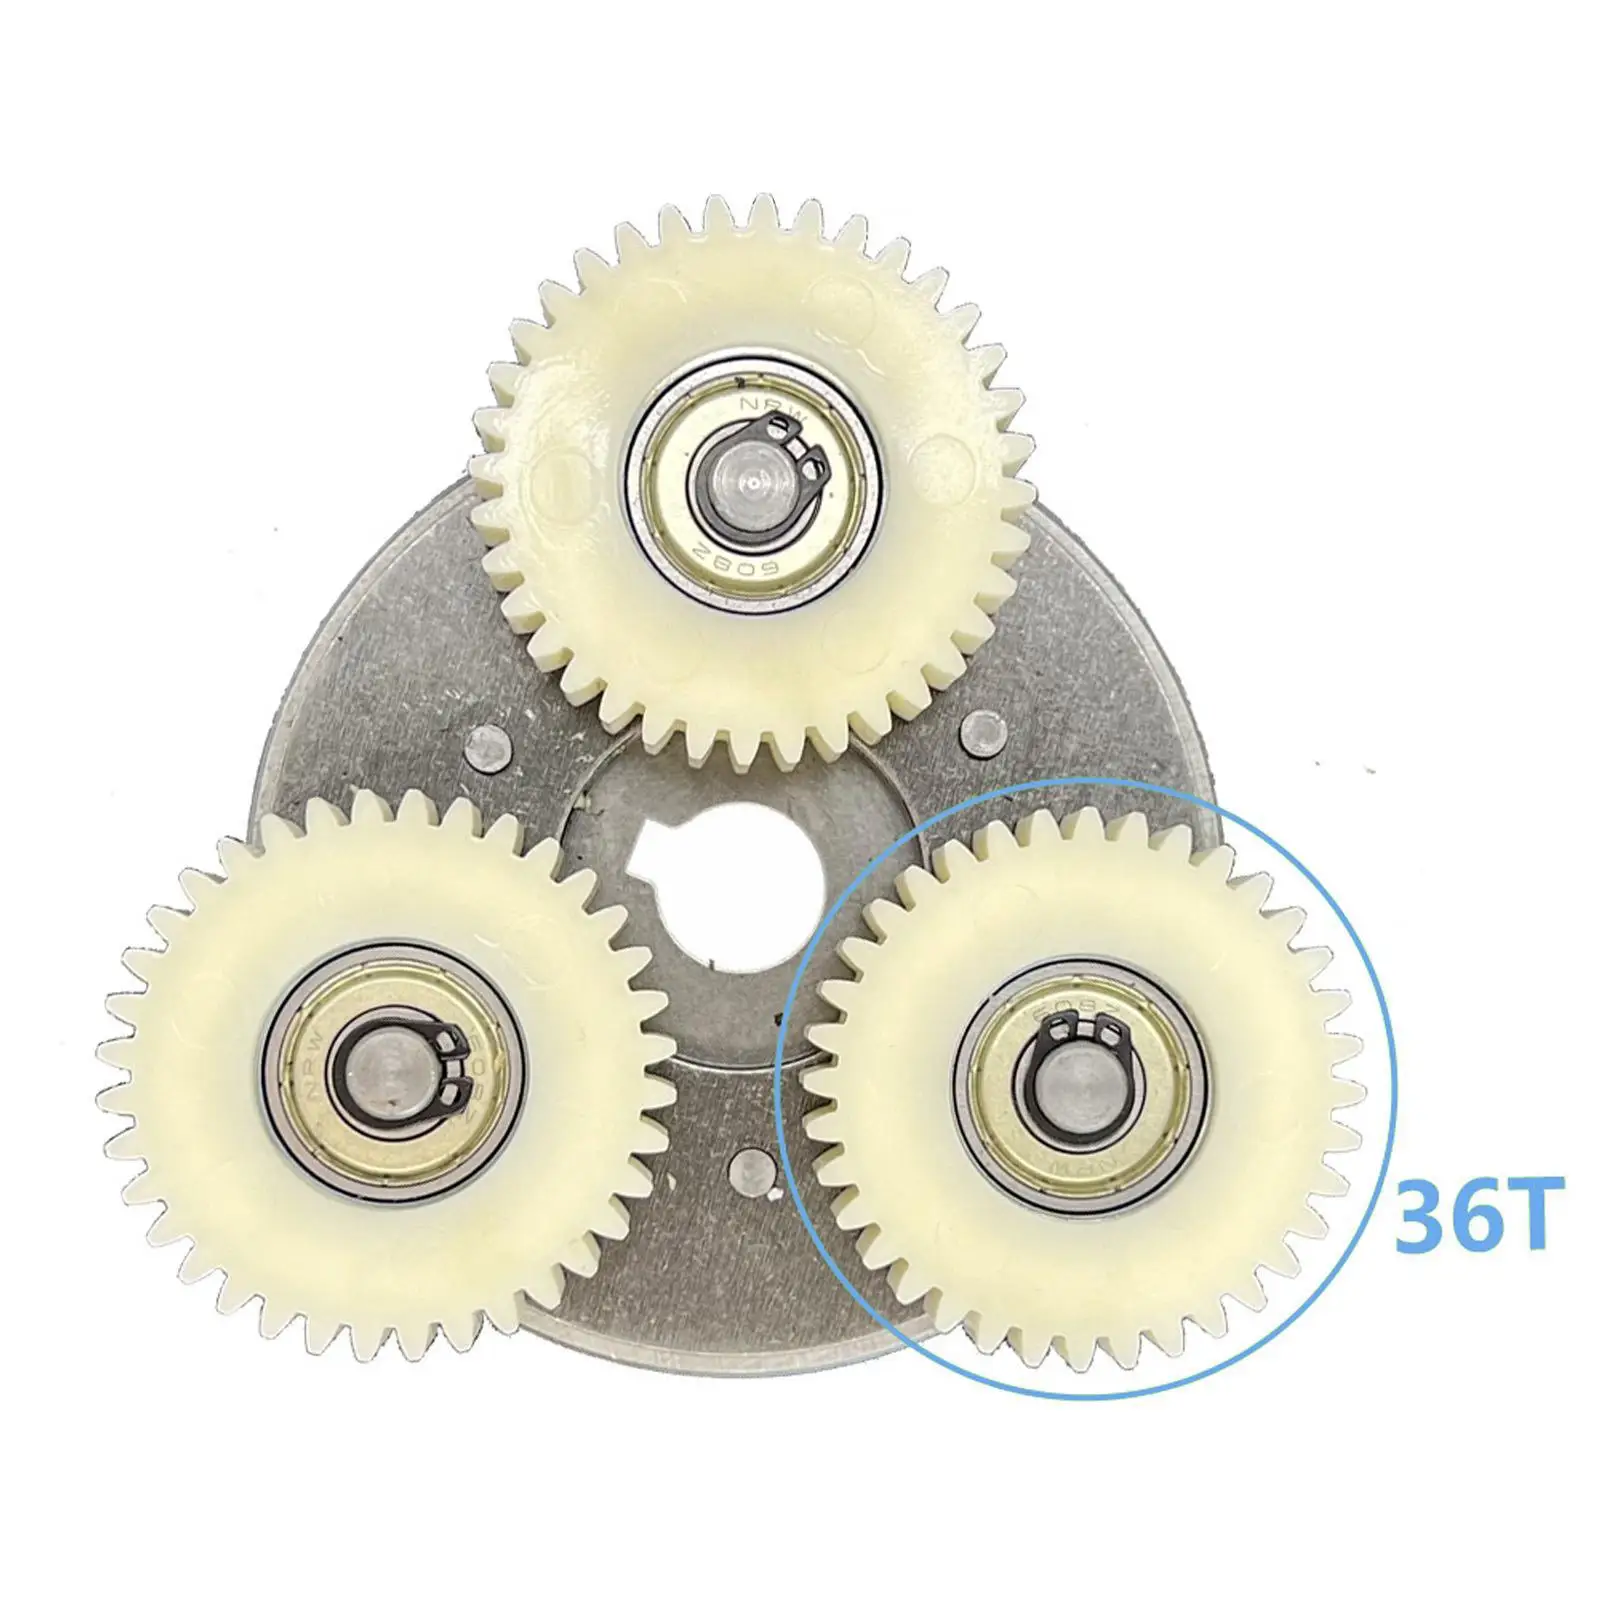 EBike Motor Gear Clutch Kit 36T Nylon Gear With Bearing 86mm Clutch For Bafang  500W Motor Bicycle Modification Accessories - AliExpress